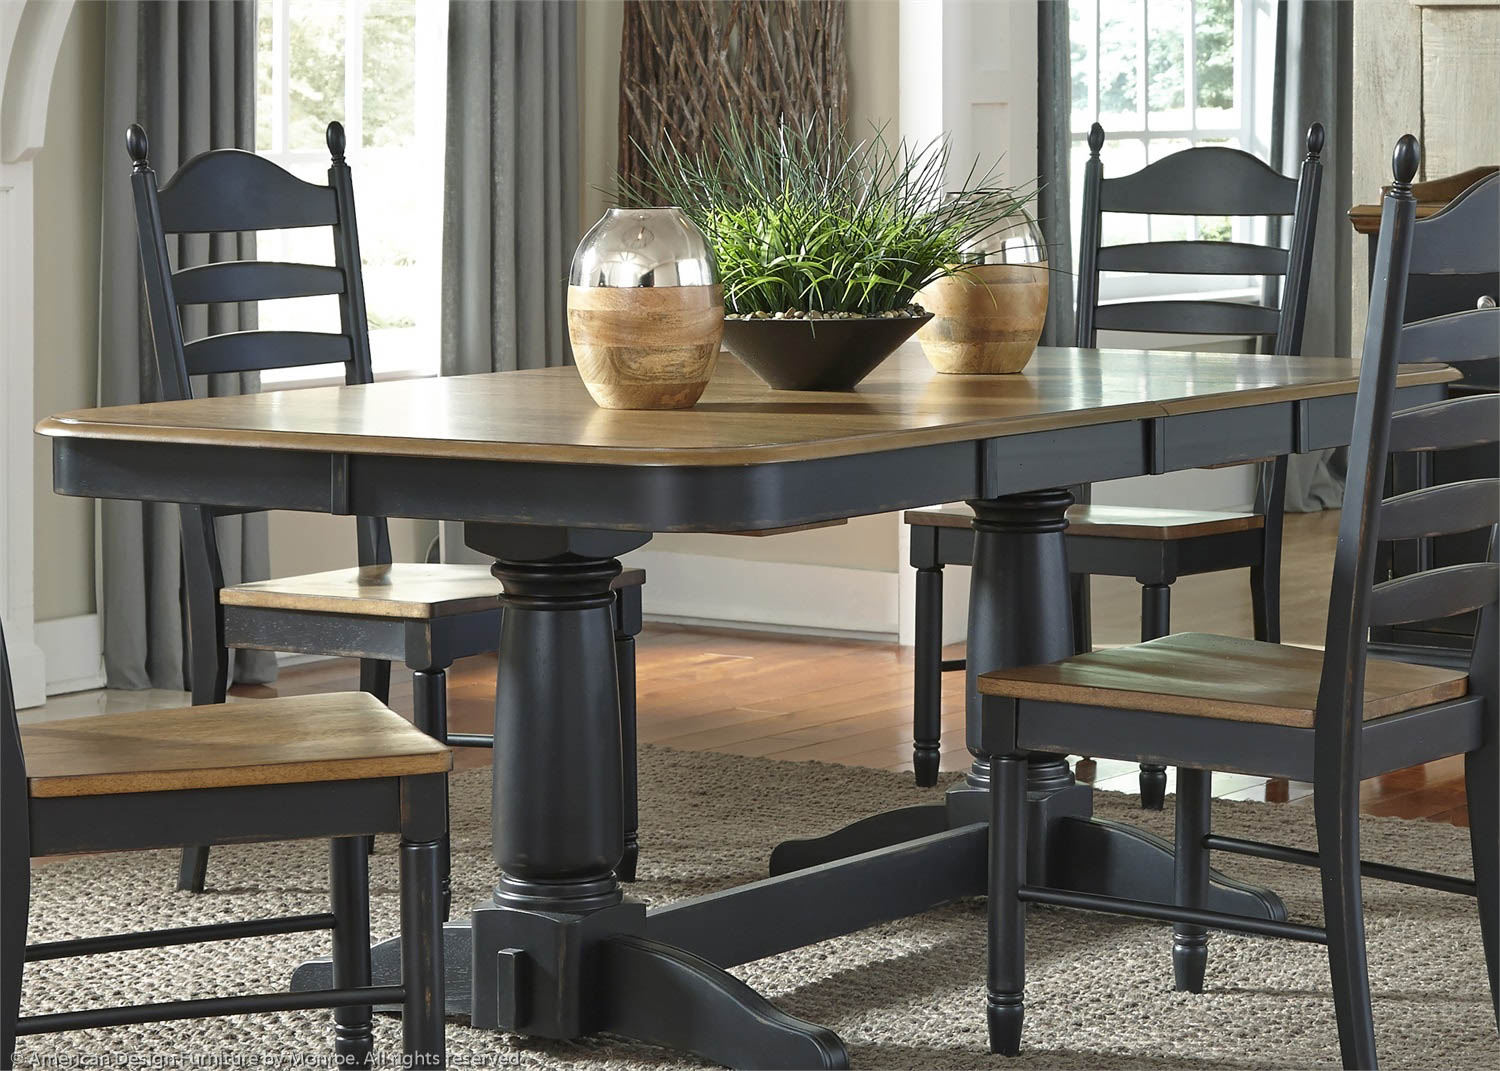 Milford Casual Table Pic 1 (Heading Double Pedestal Table)